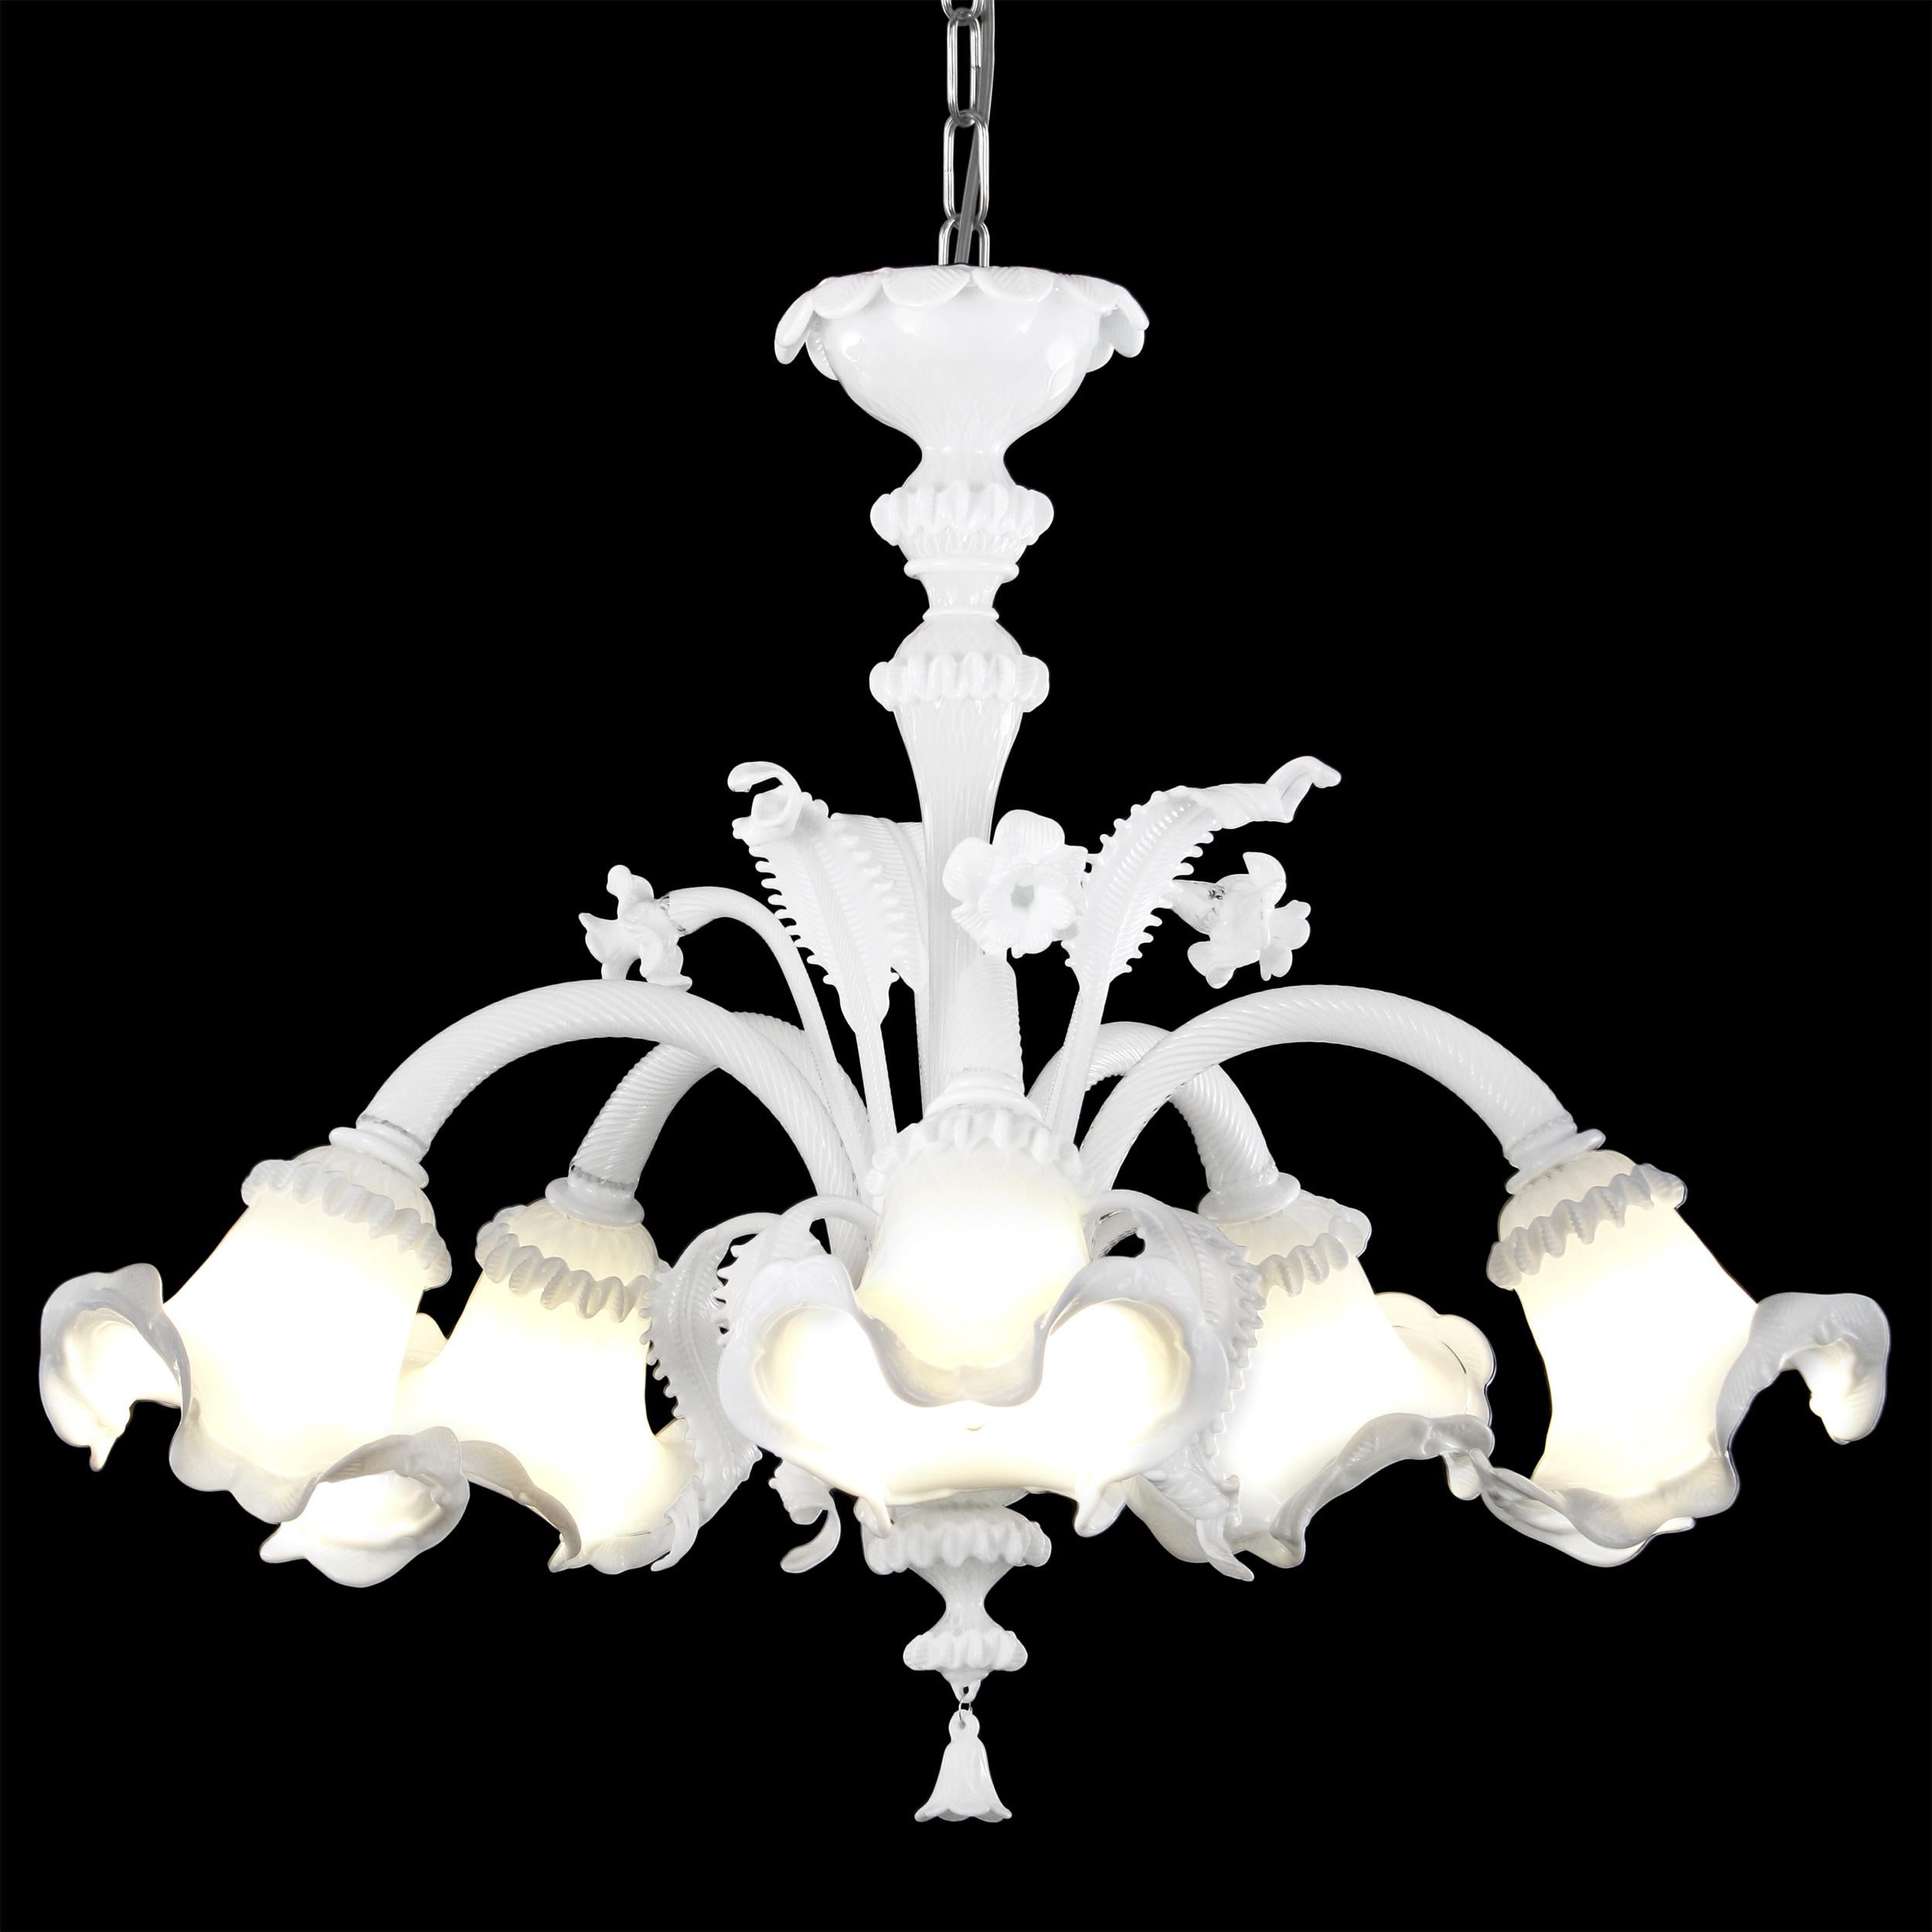 Luxury chandelier 5 arms white encased Murano glass with upper flowers and leaves V-Classic 900 by Multiforme
A wide range of colours is available for the V-Classic 900 collection.
Moreover, a wide range of warm and cool colours can be combined with